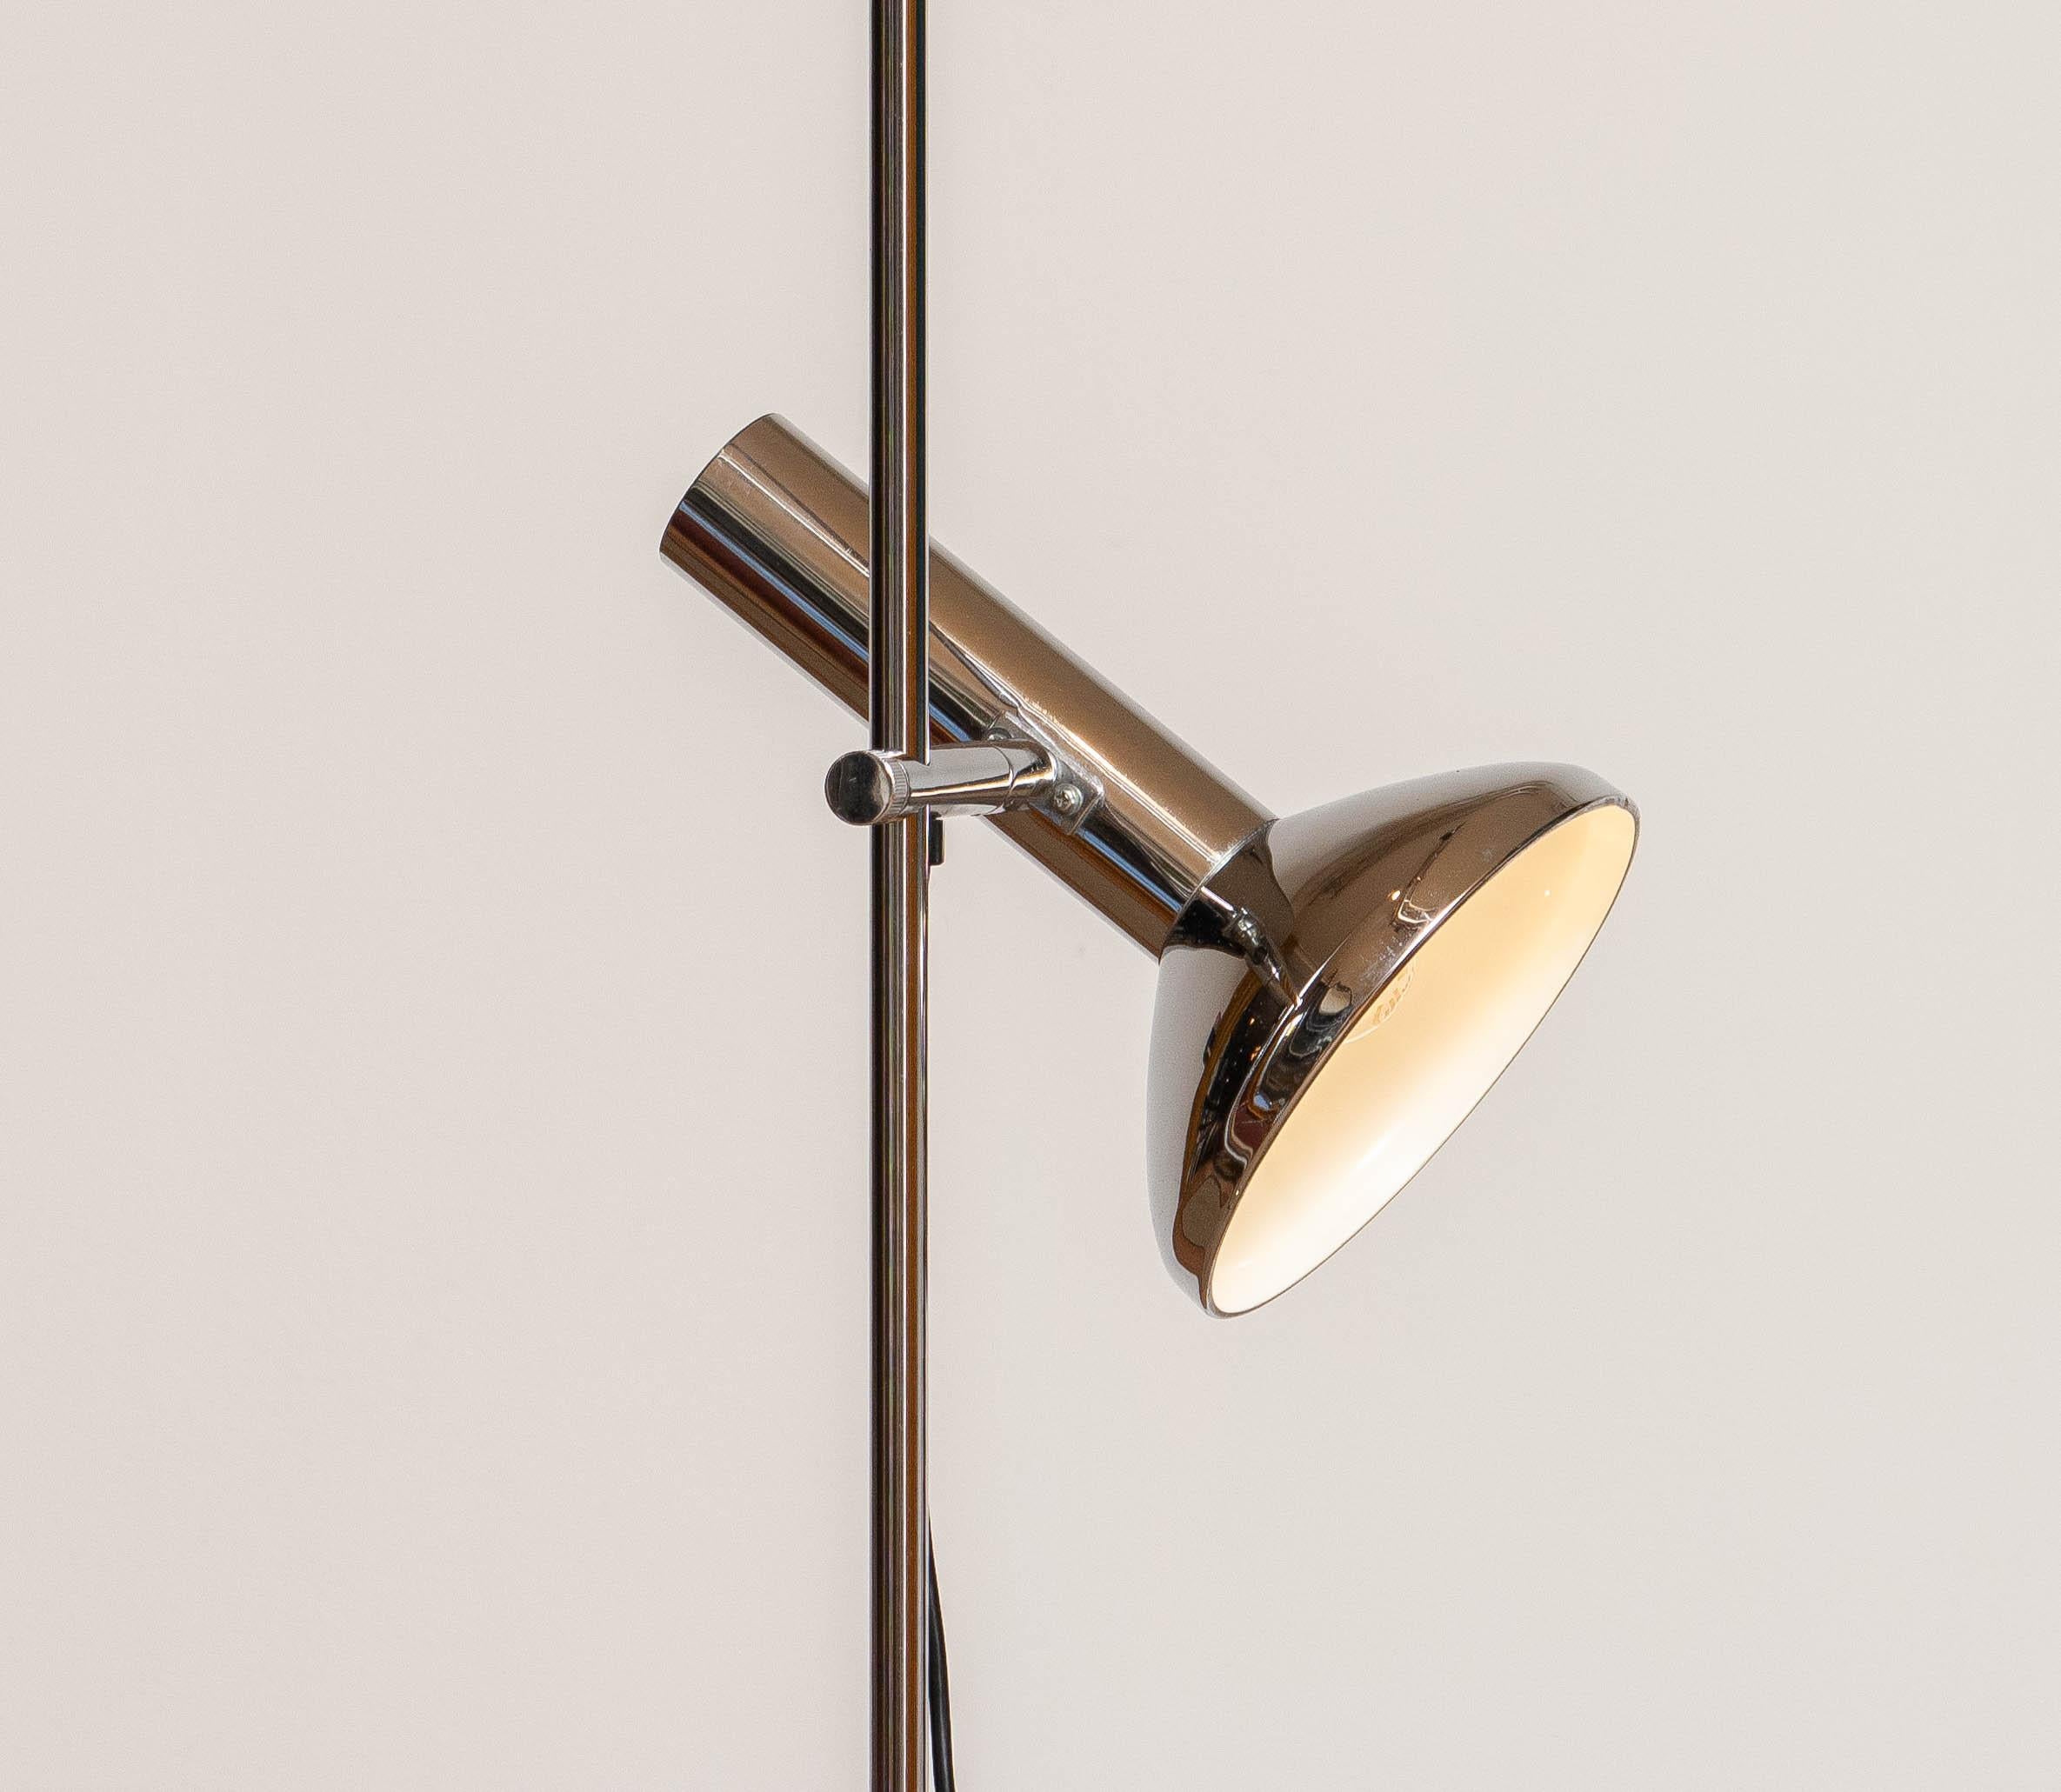 Adjustable in all directions chromed metal minimalist floor lamp designed by the Dutch Erwi by Philips and manufactured by Koch & Lowy. Consists one screw fitting size E26 / 27 for 110 as wel as 230 volts.
Technically 100% and in overall very good